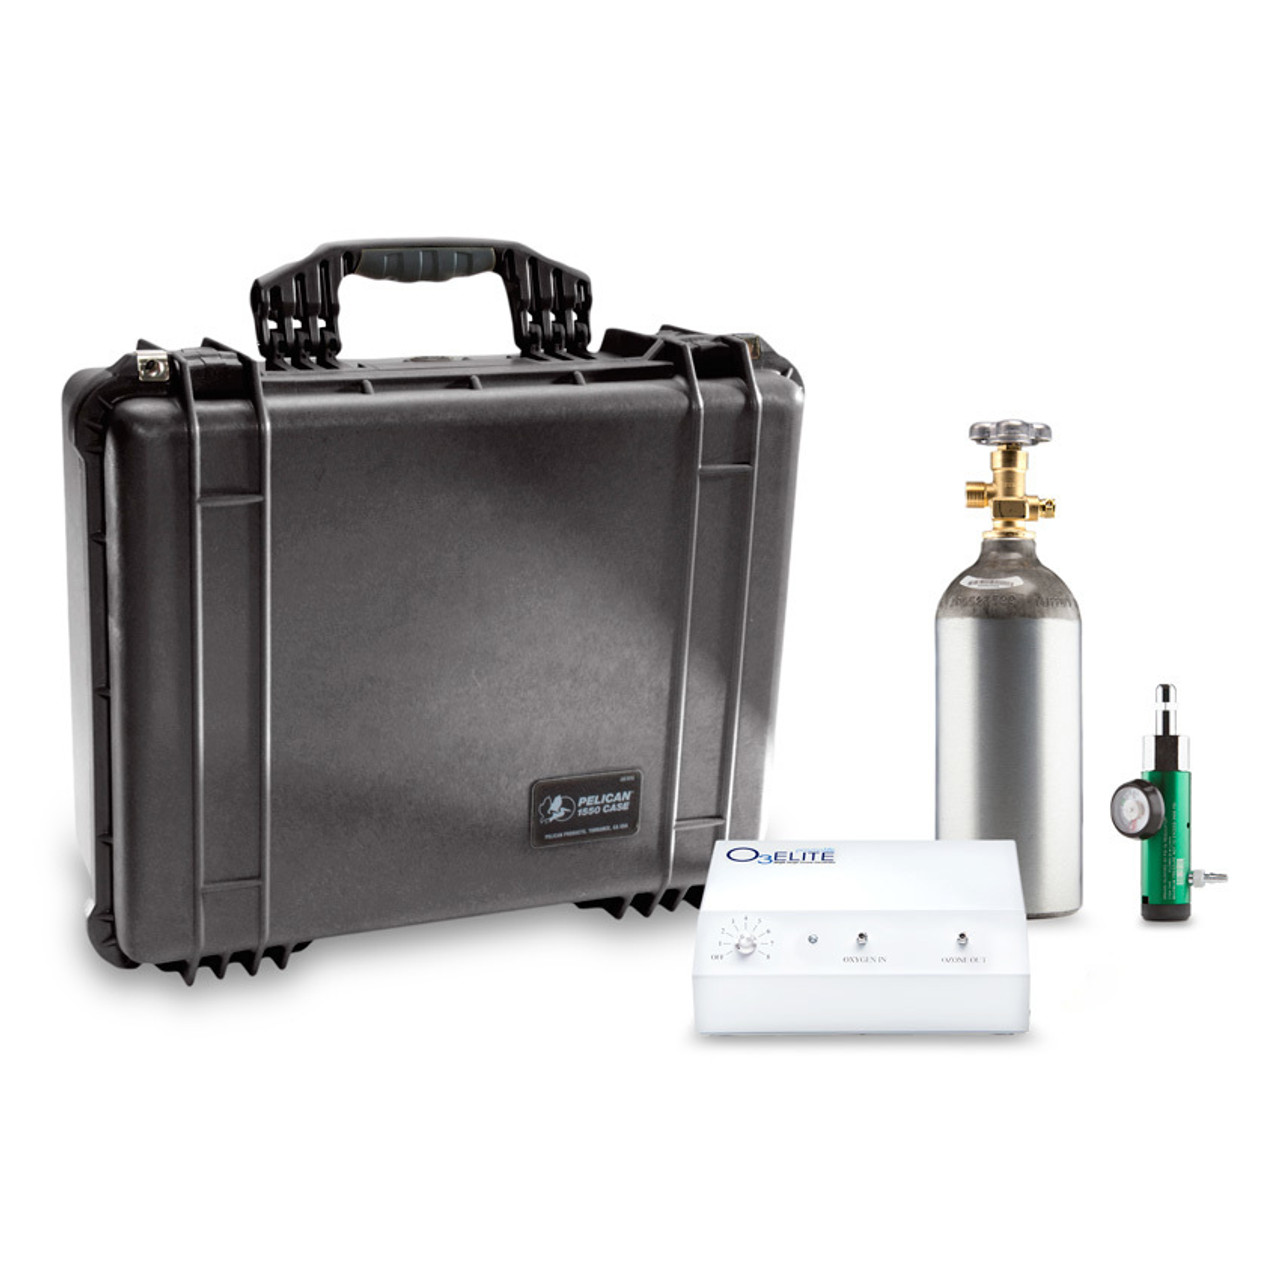 O3Elite Single Professional with Oxygen Tank and Regulator